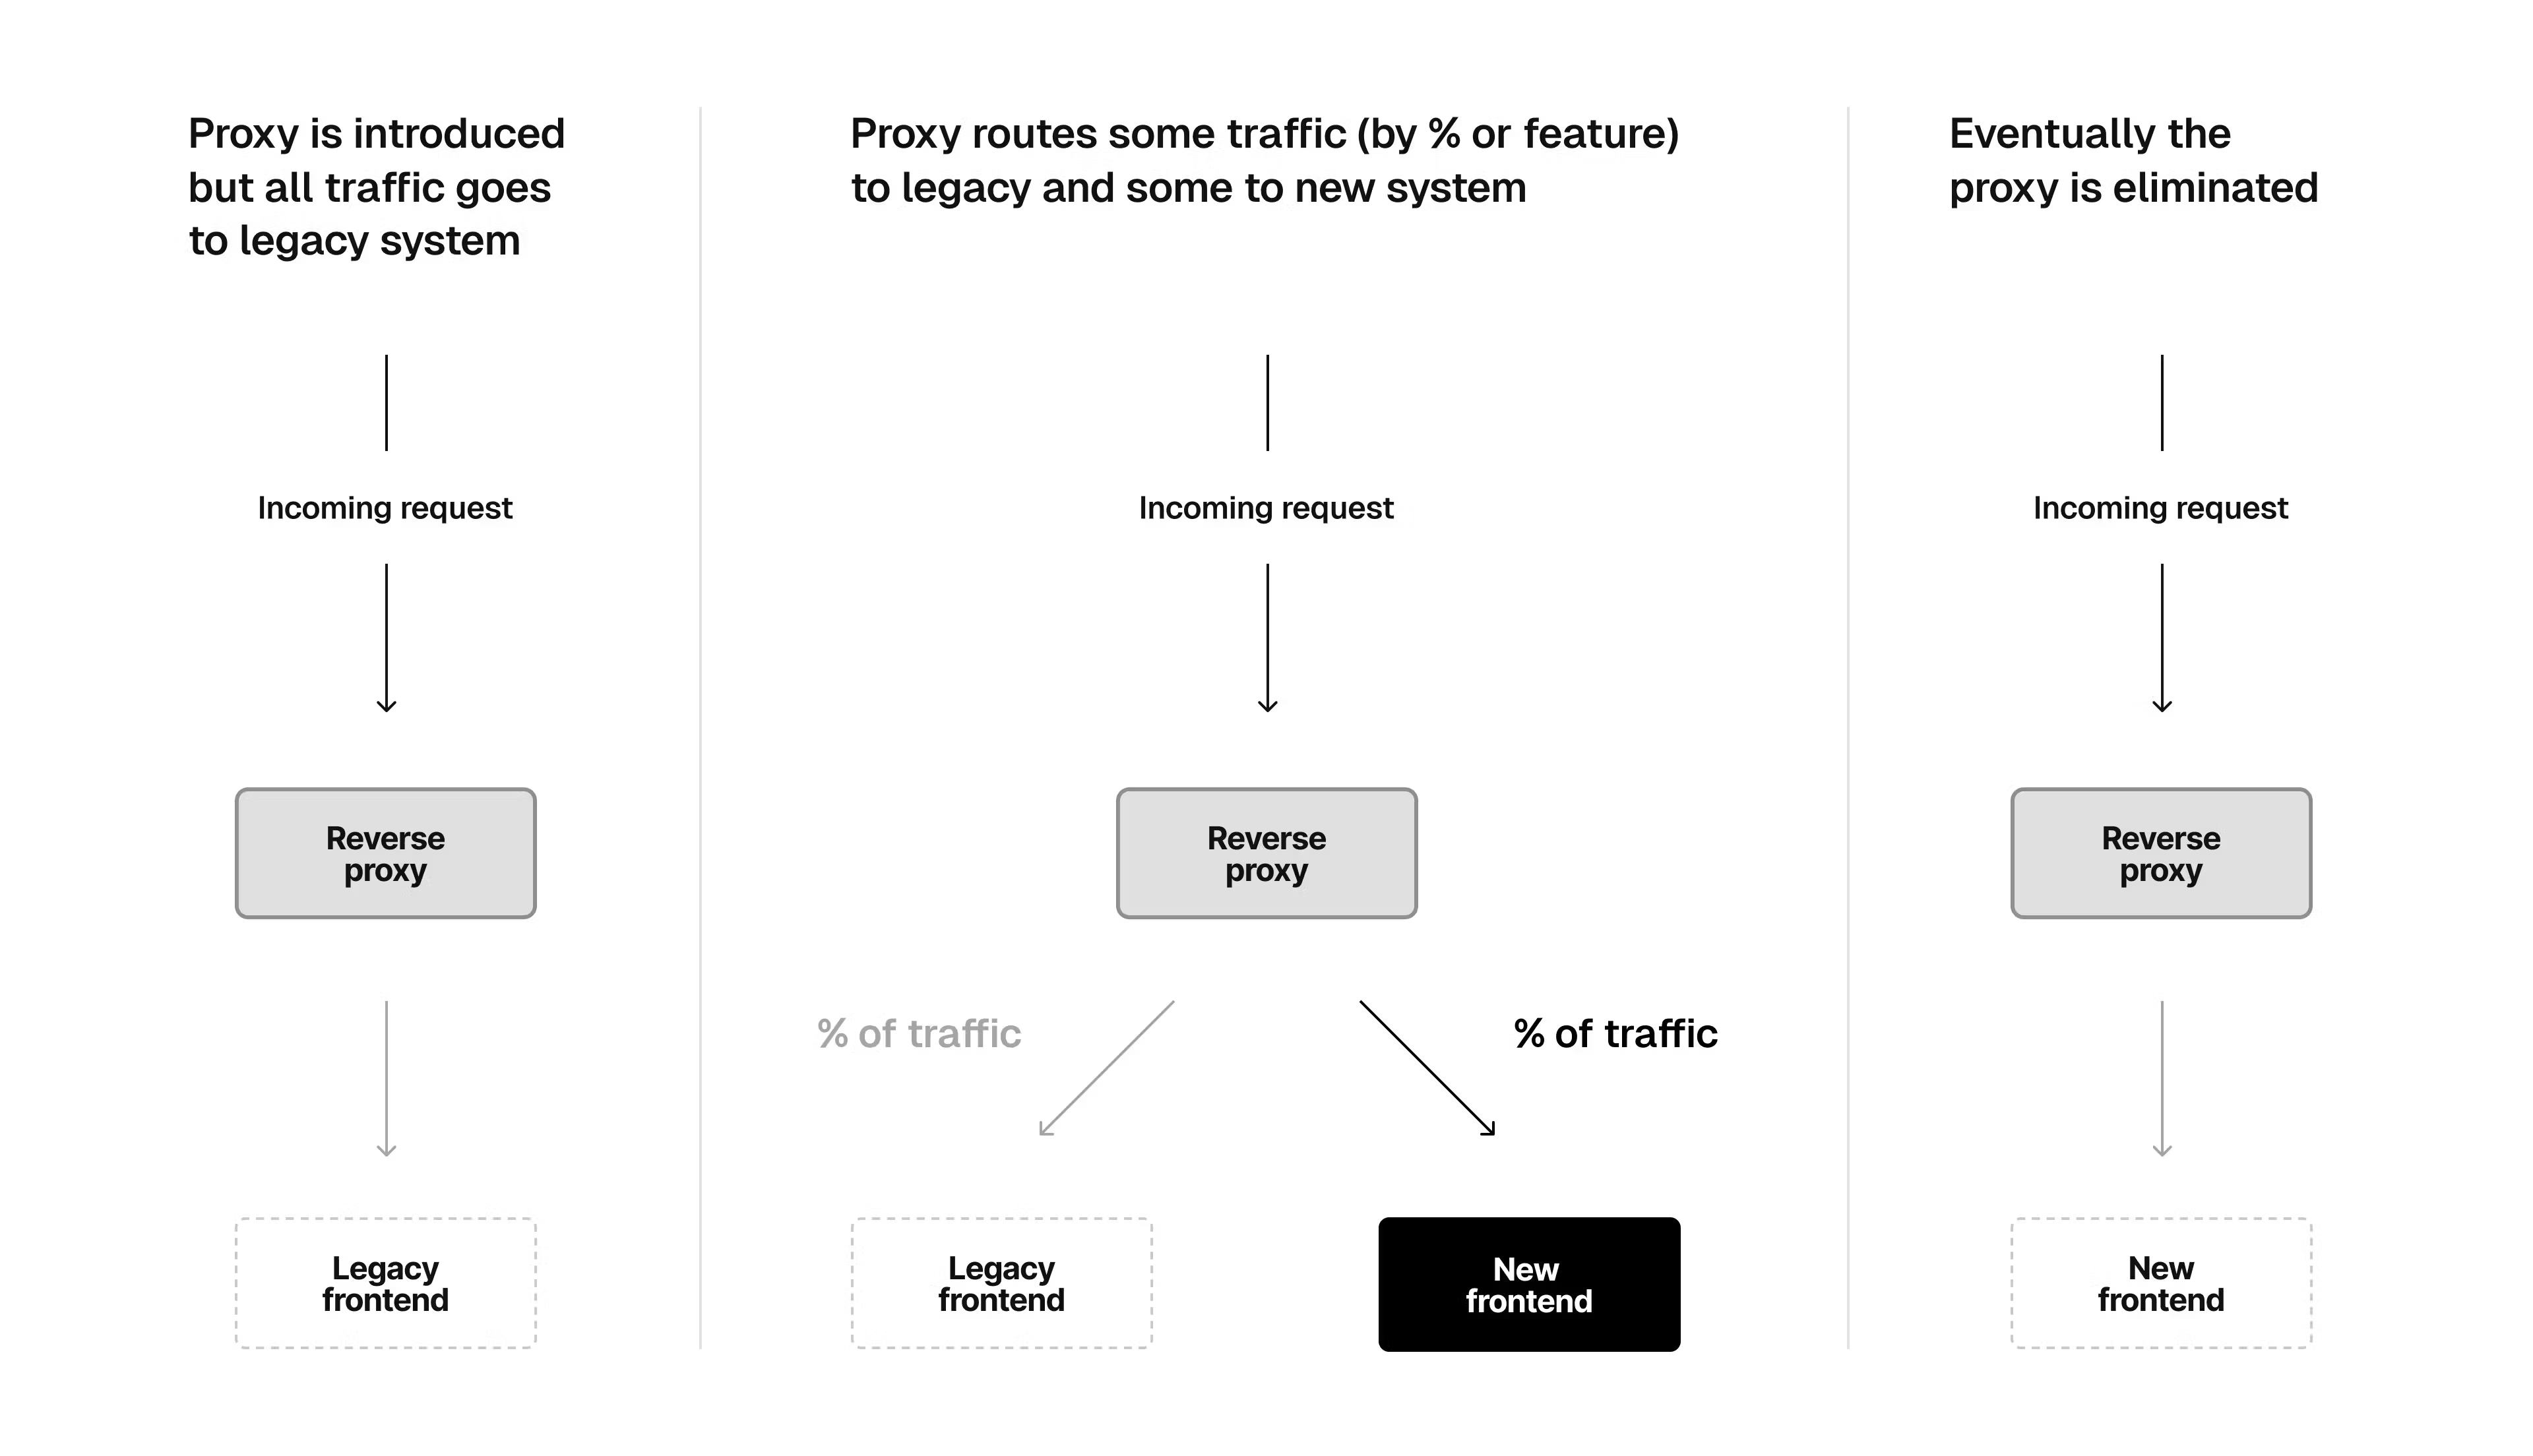 During a migration, incoming traffic will be routed by a reverse proxy, which allows you to use feature flagging to iteratively designate what percentage of users should go to a new page.